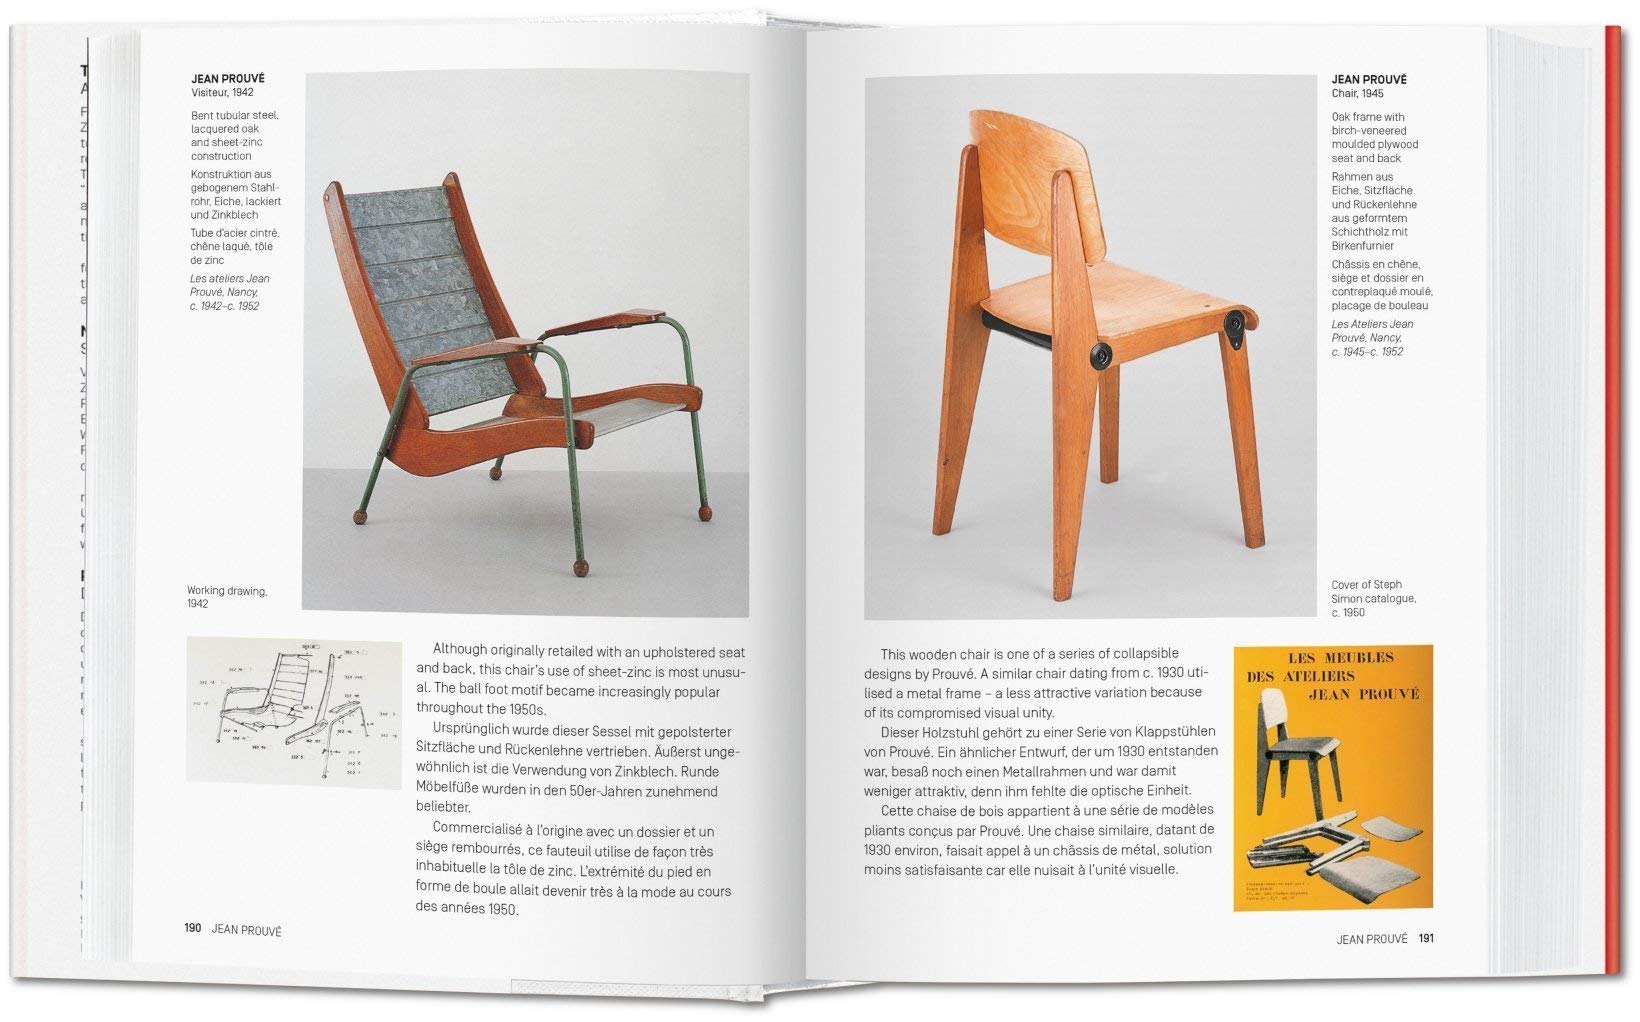 Sách Ngoại Văn : 1000 Chairs. Revised and updated edition